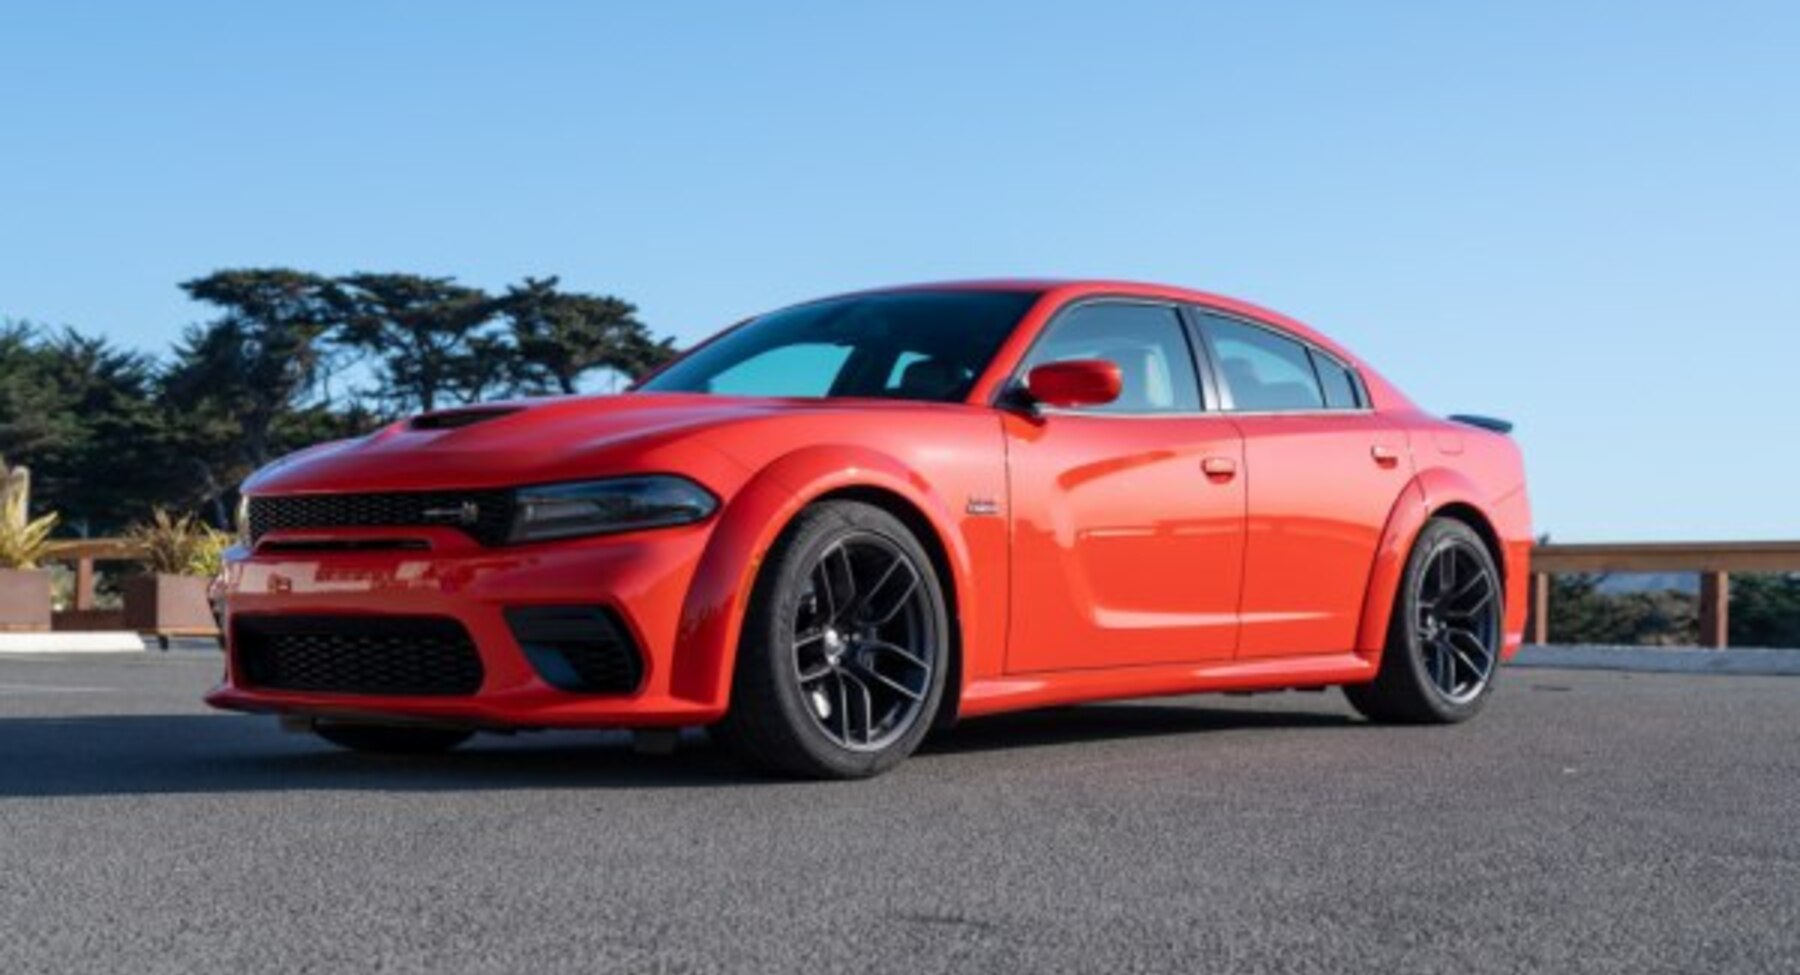 Dodge Charger VII (LD; facelift 2019) Scat Pack 6.4 HEMI V8 (485 Hp) WideBody Automatic 2019, 2020, 2021, 2022